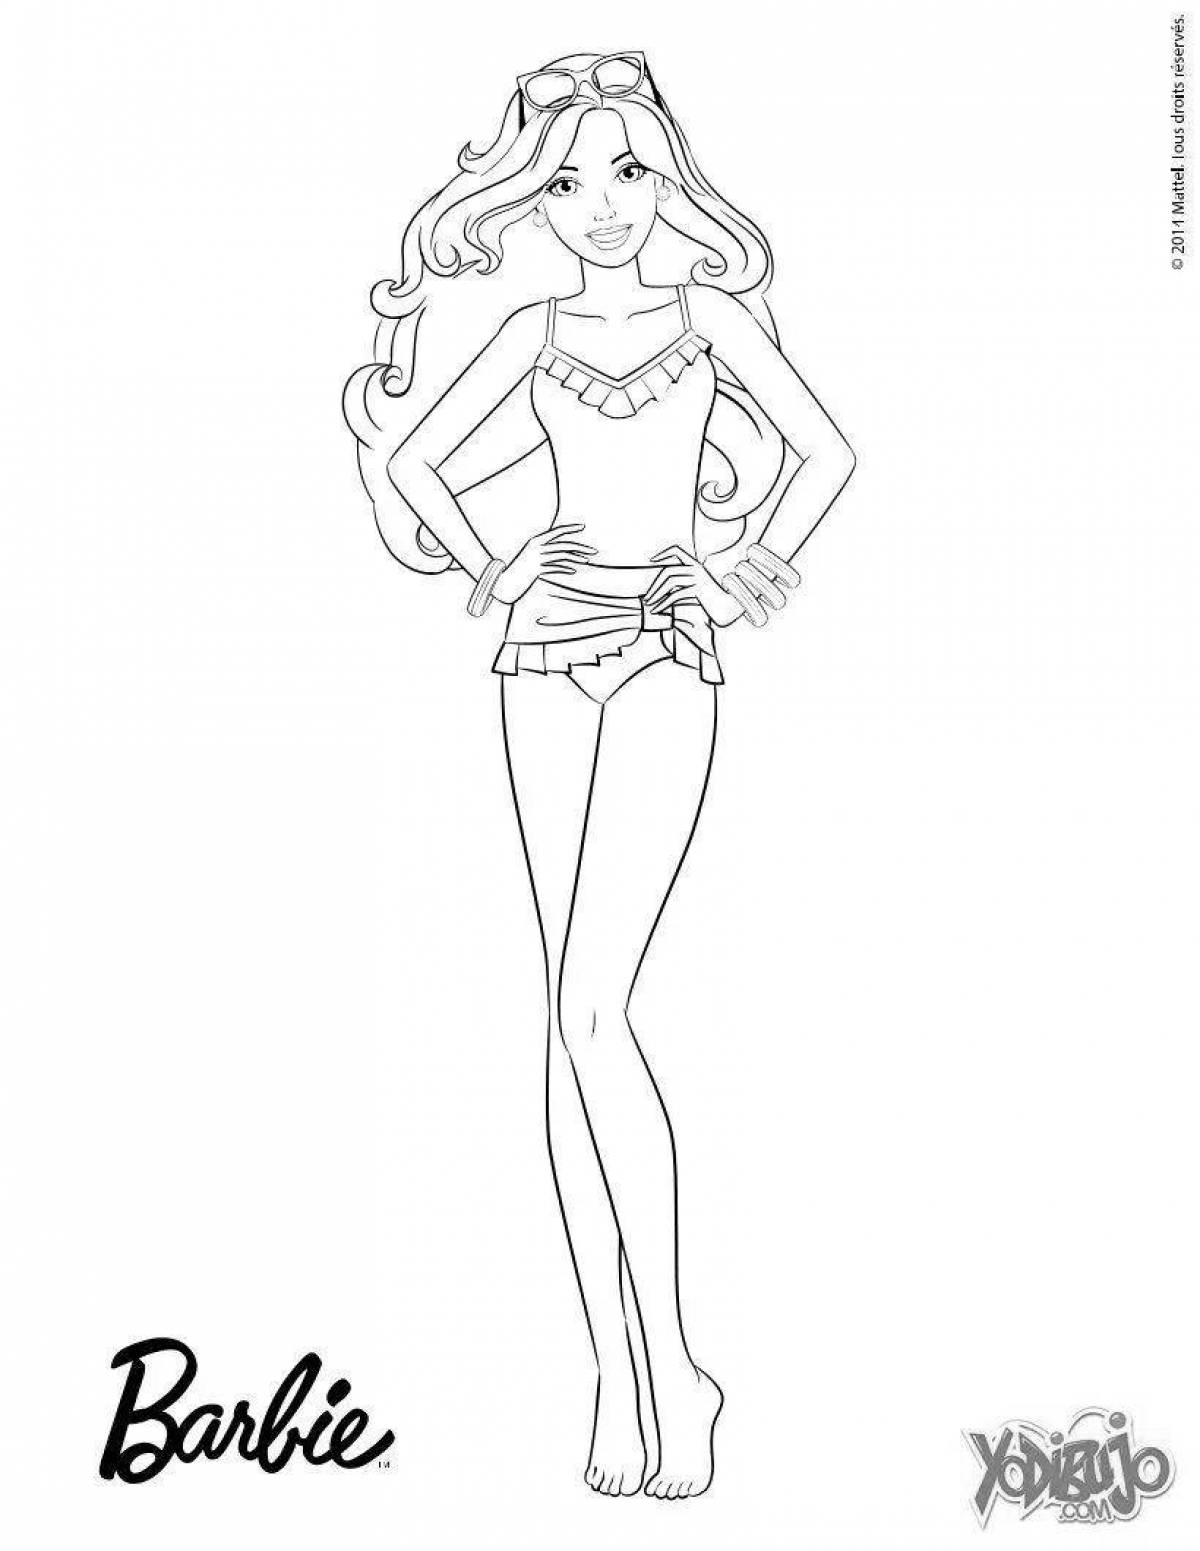 Coloring book shining barbie in a bathing suit